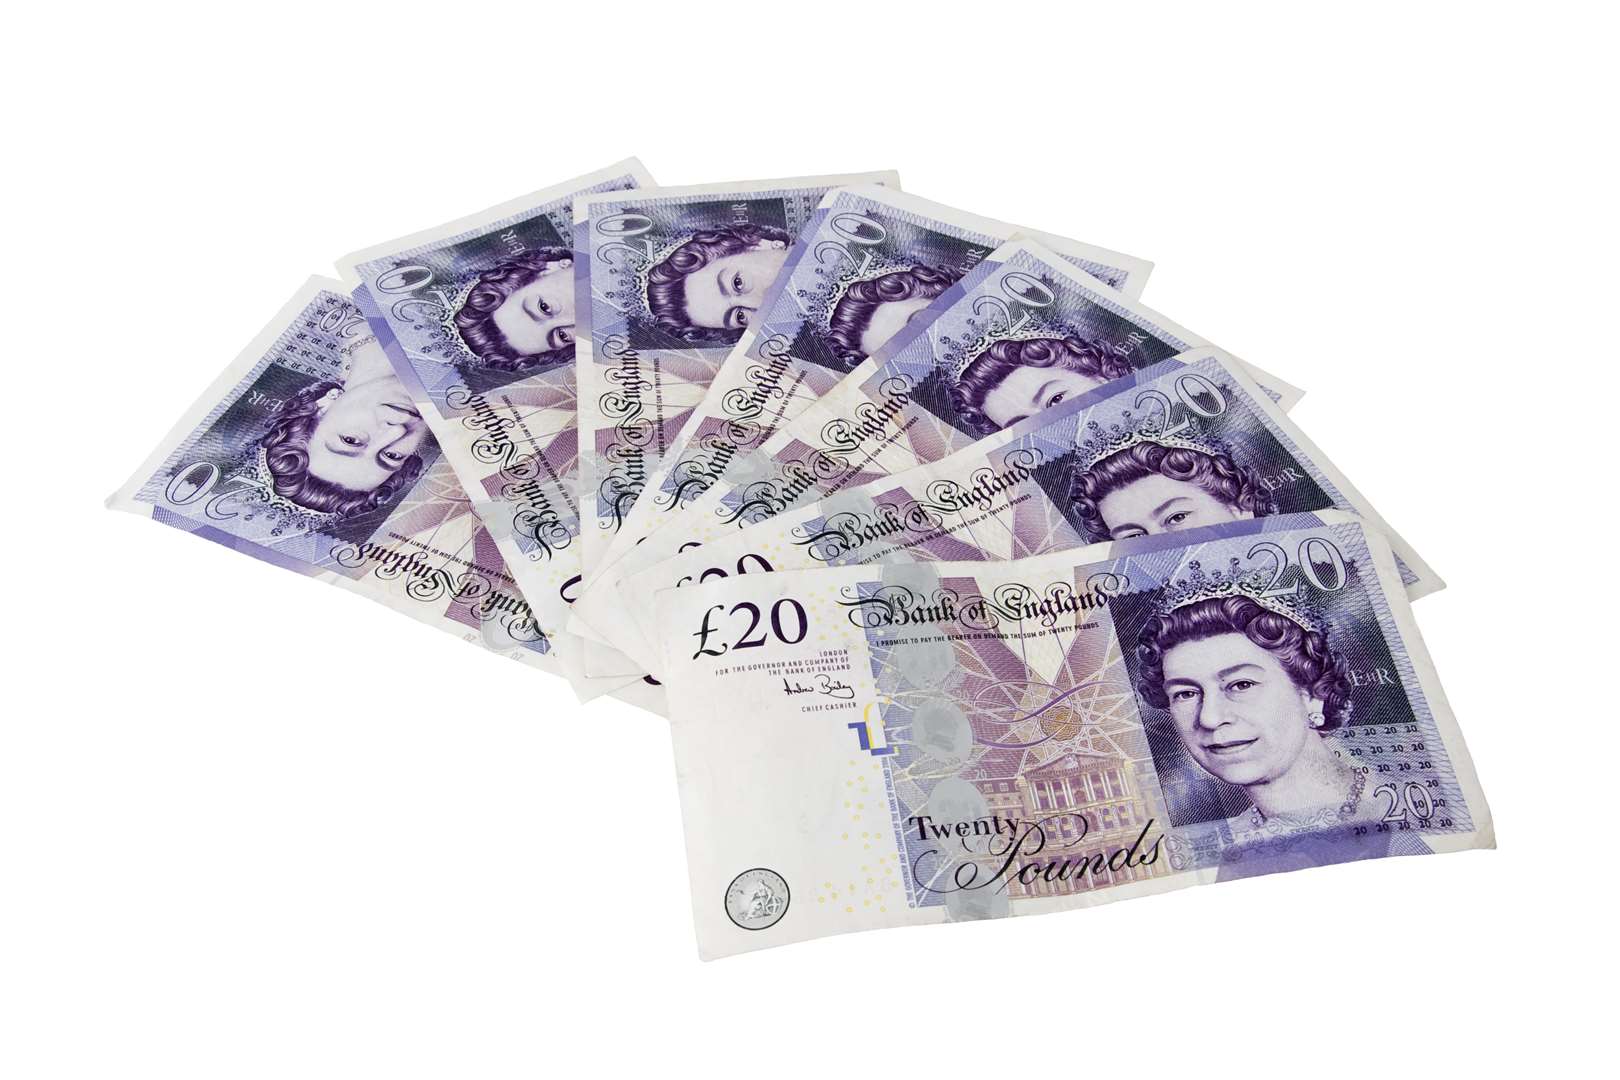 Police have issued a warning about fake £20 notes. Picture: Thinkstock Images